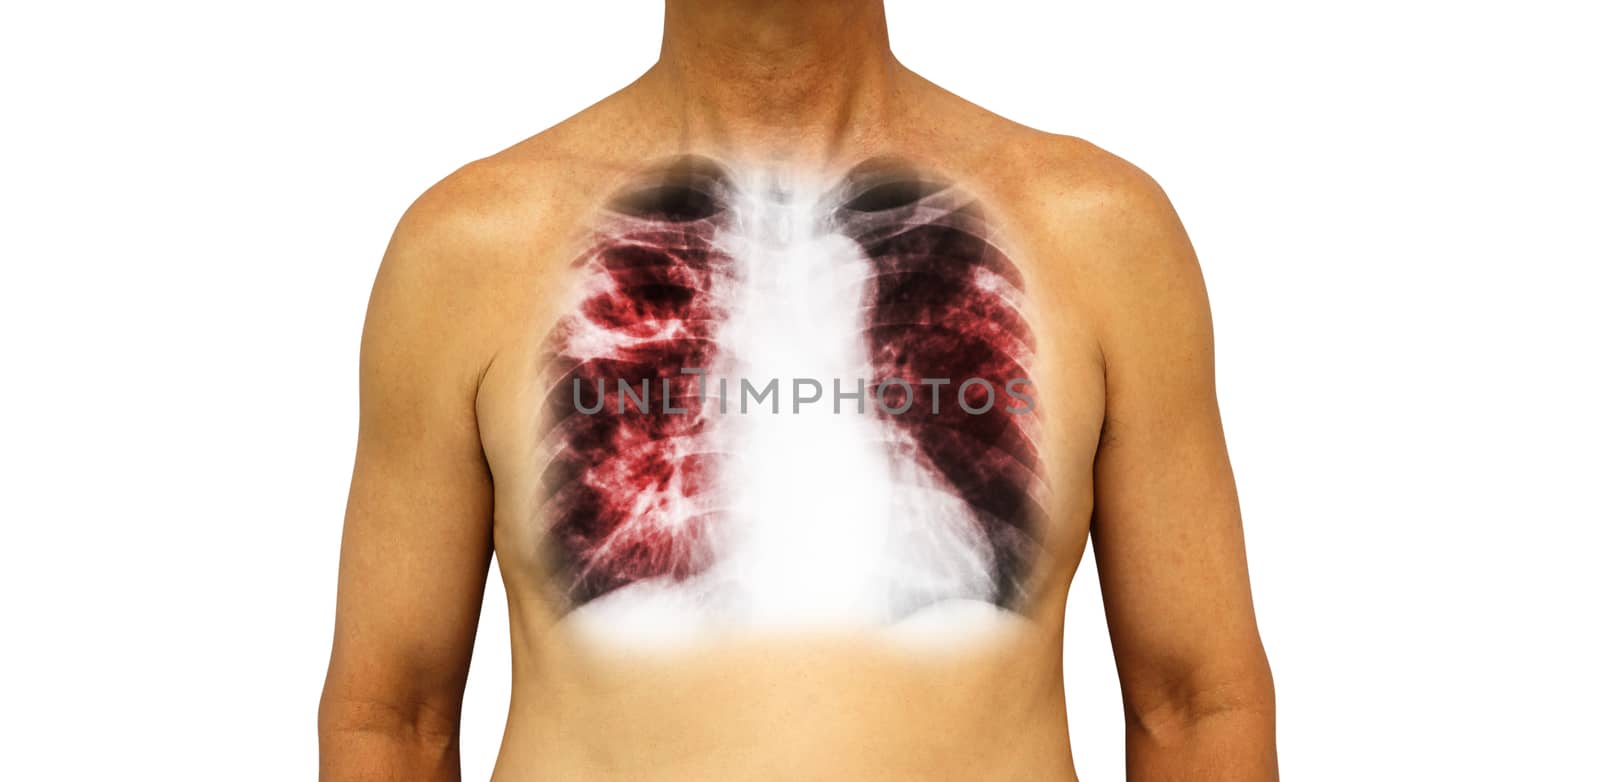 Pulmonary tuberculosis . Human chest with x-ray show cavity at right upper lung and interstitial infiltrate both lung due to infection . Isolated background by stockdevil